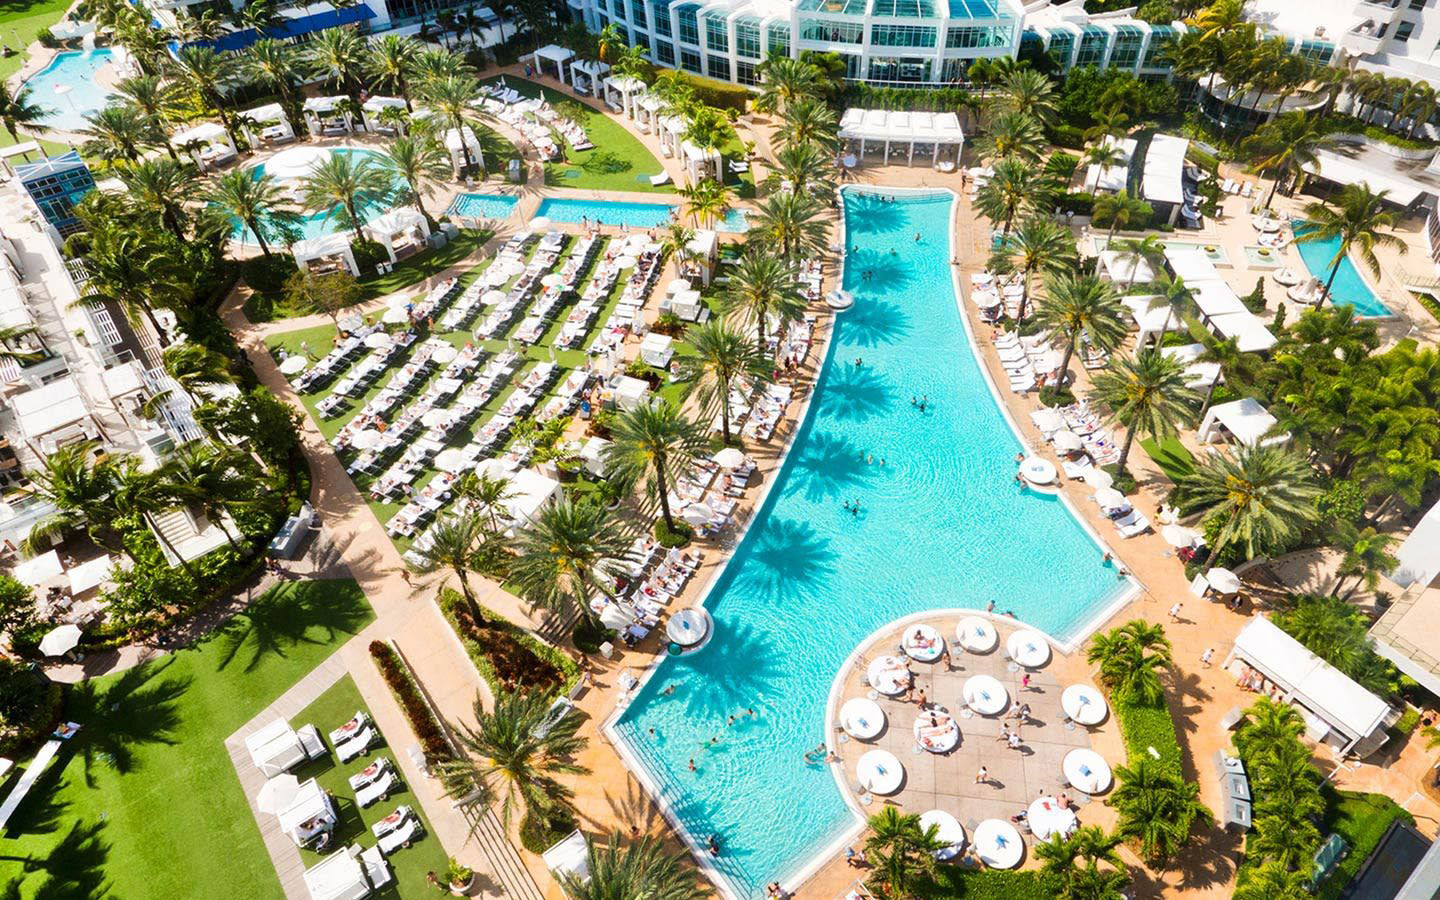 The Fontainebleau in Miami Beach is one of more than 70 hotels participating in Miami Hotel Months